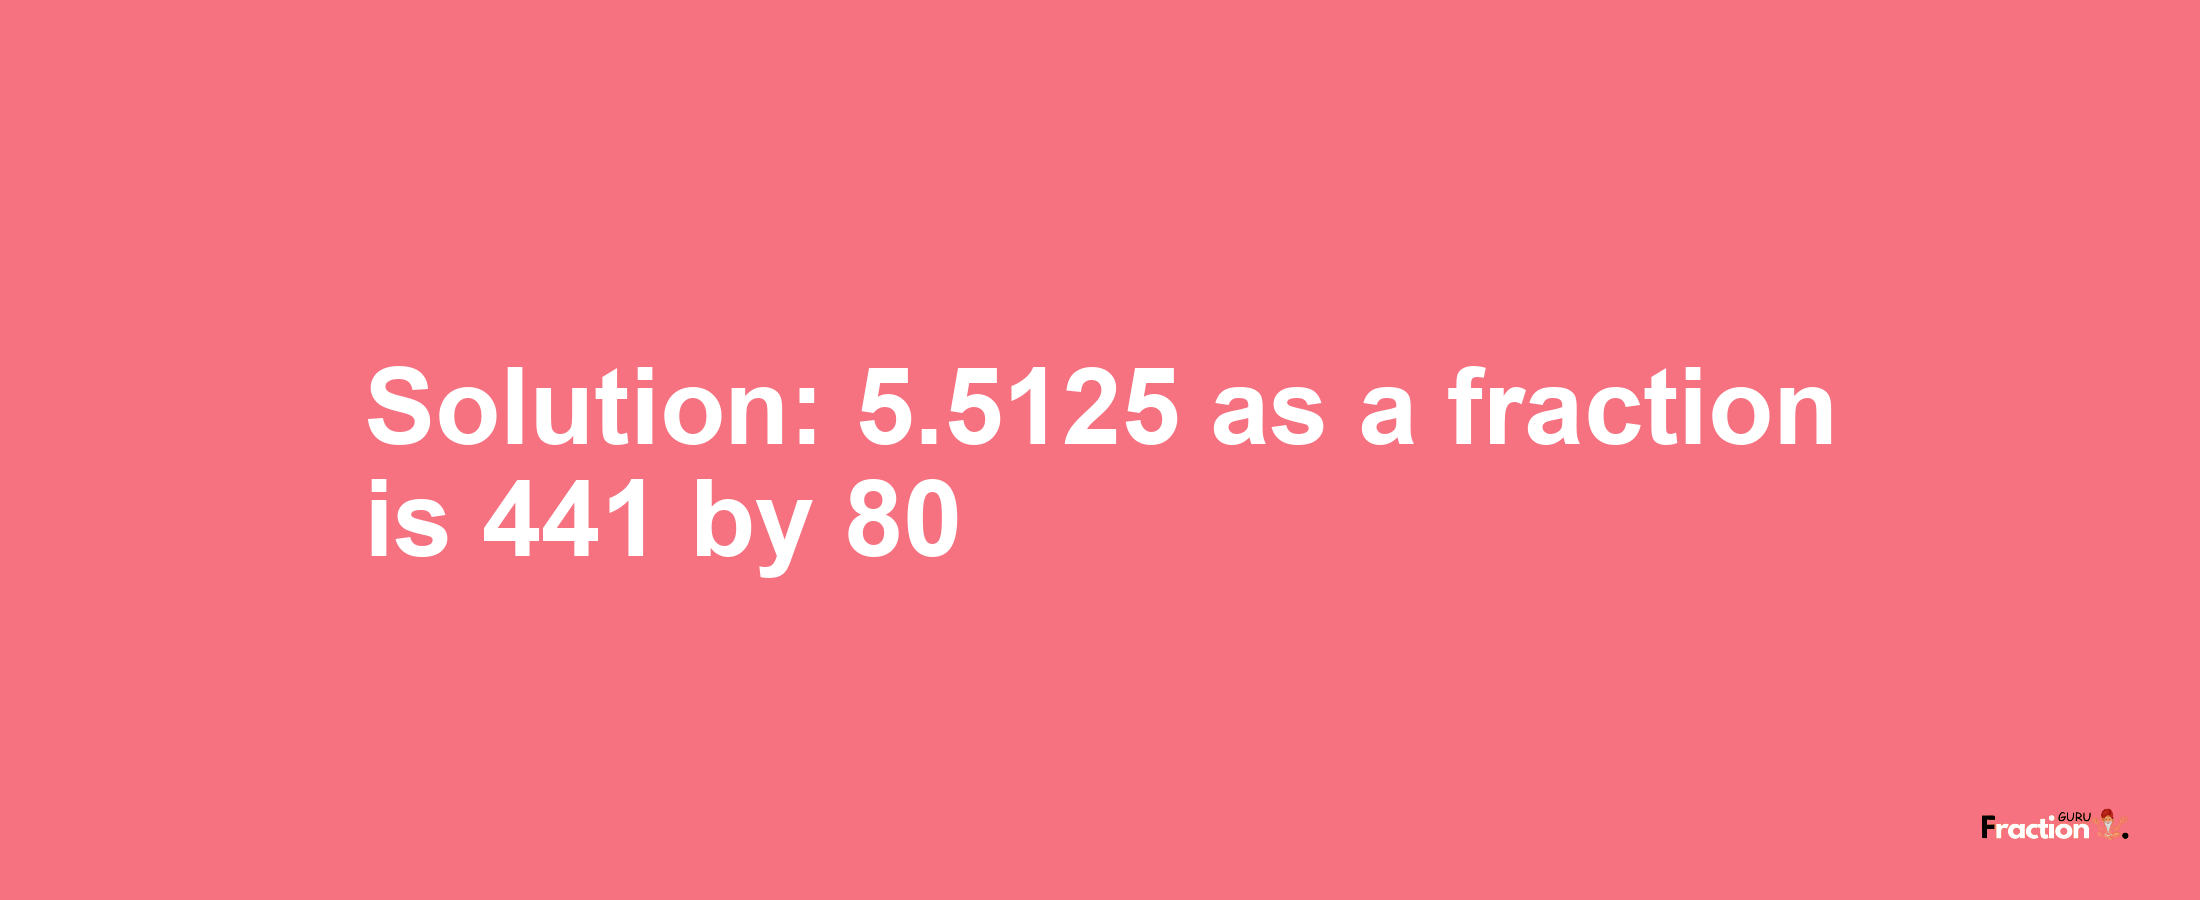 Solution:5.5125 as a fraction is 441/80